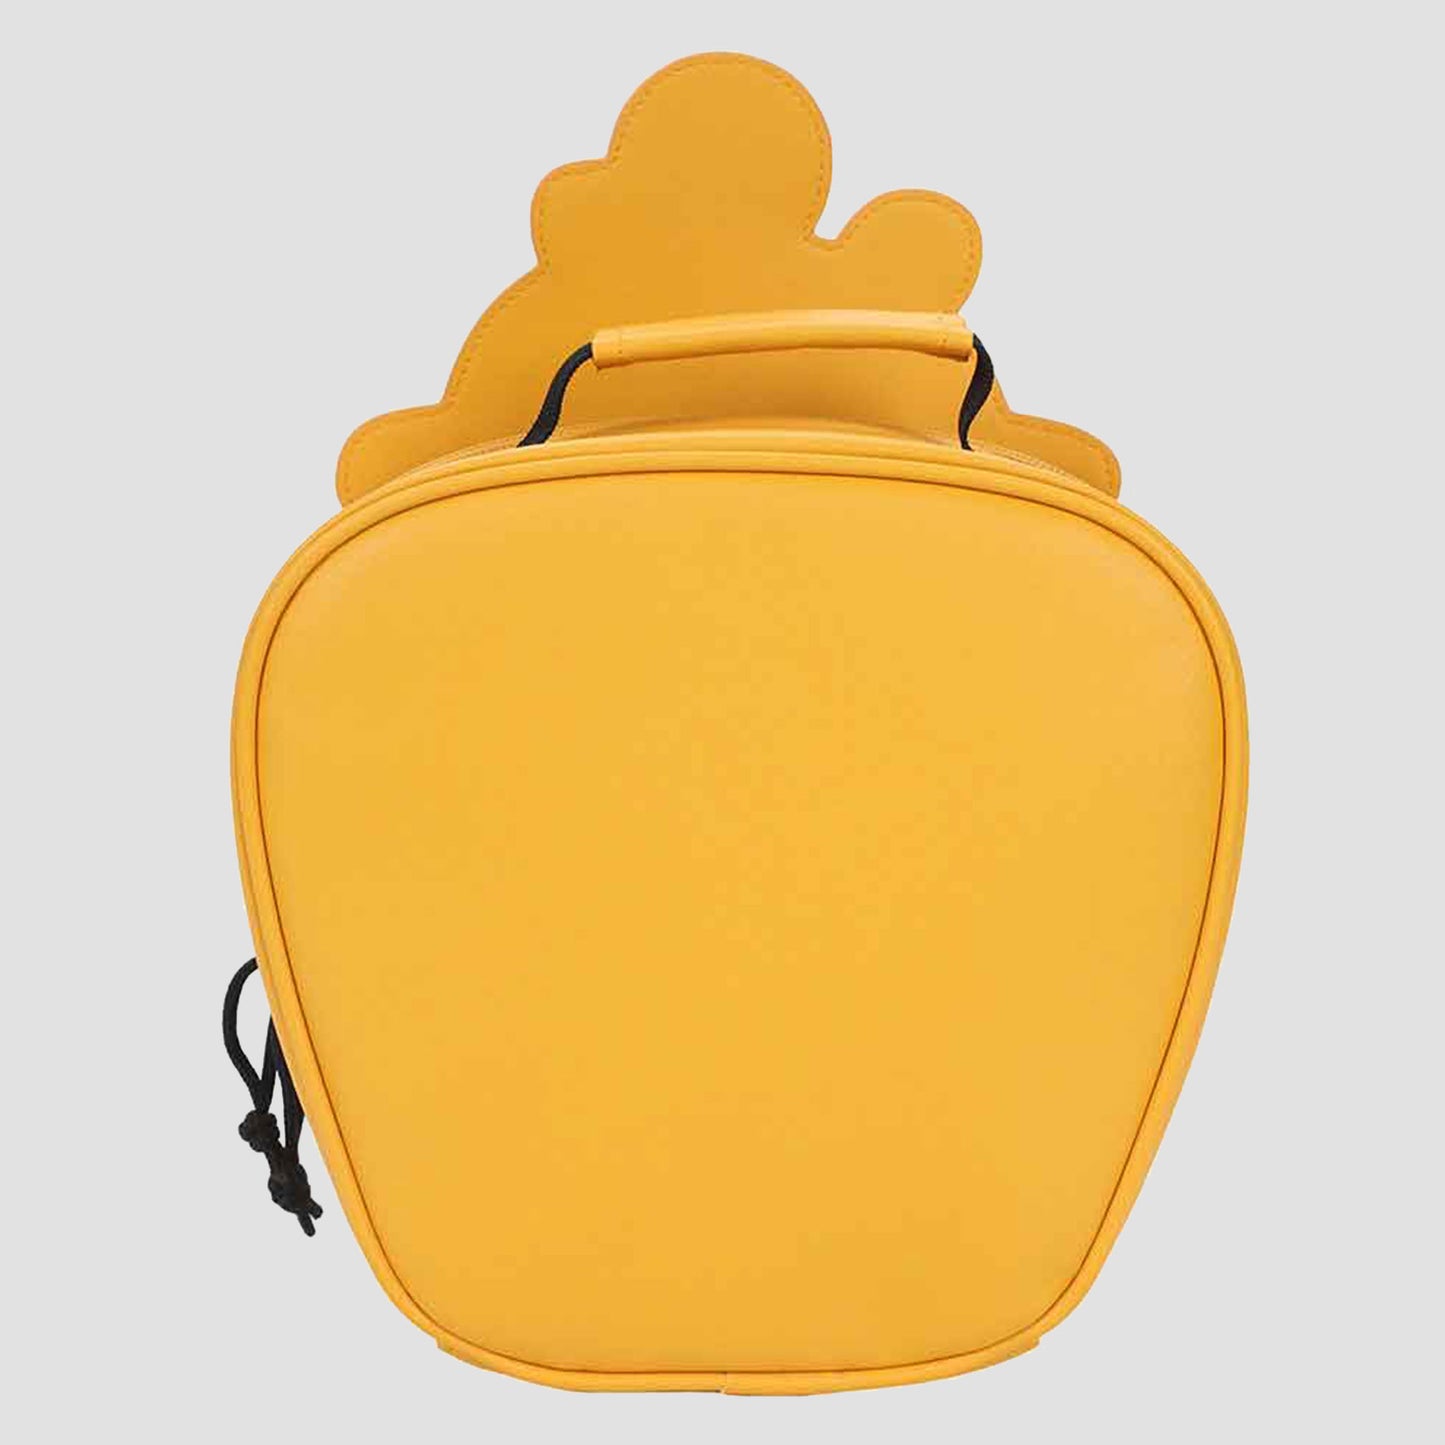 Hunny Pot (Winnie the Pooh) Disney Insulated Lunch Tote Bag